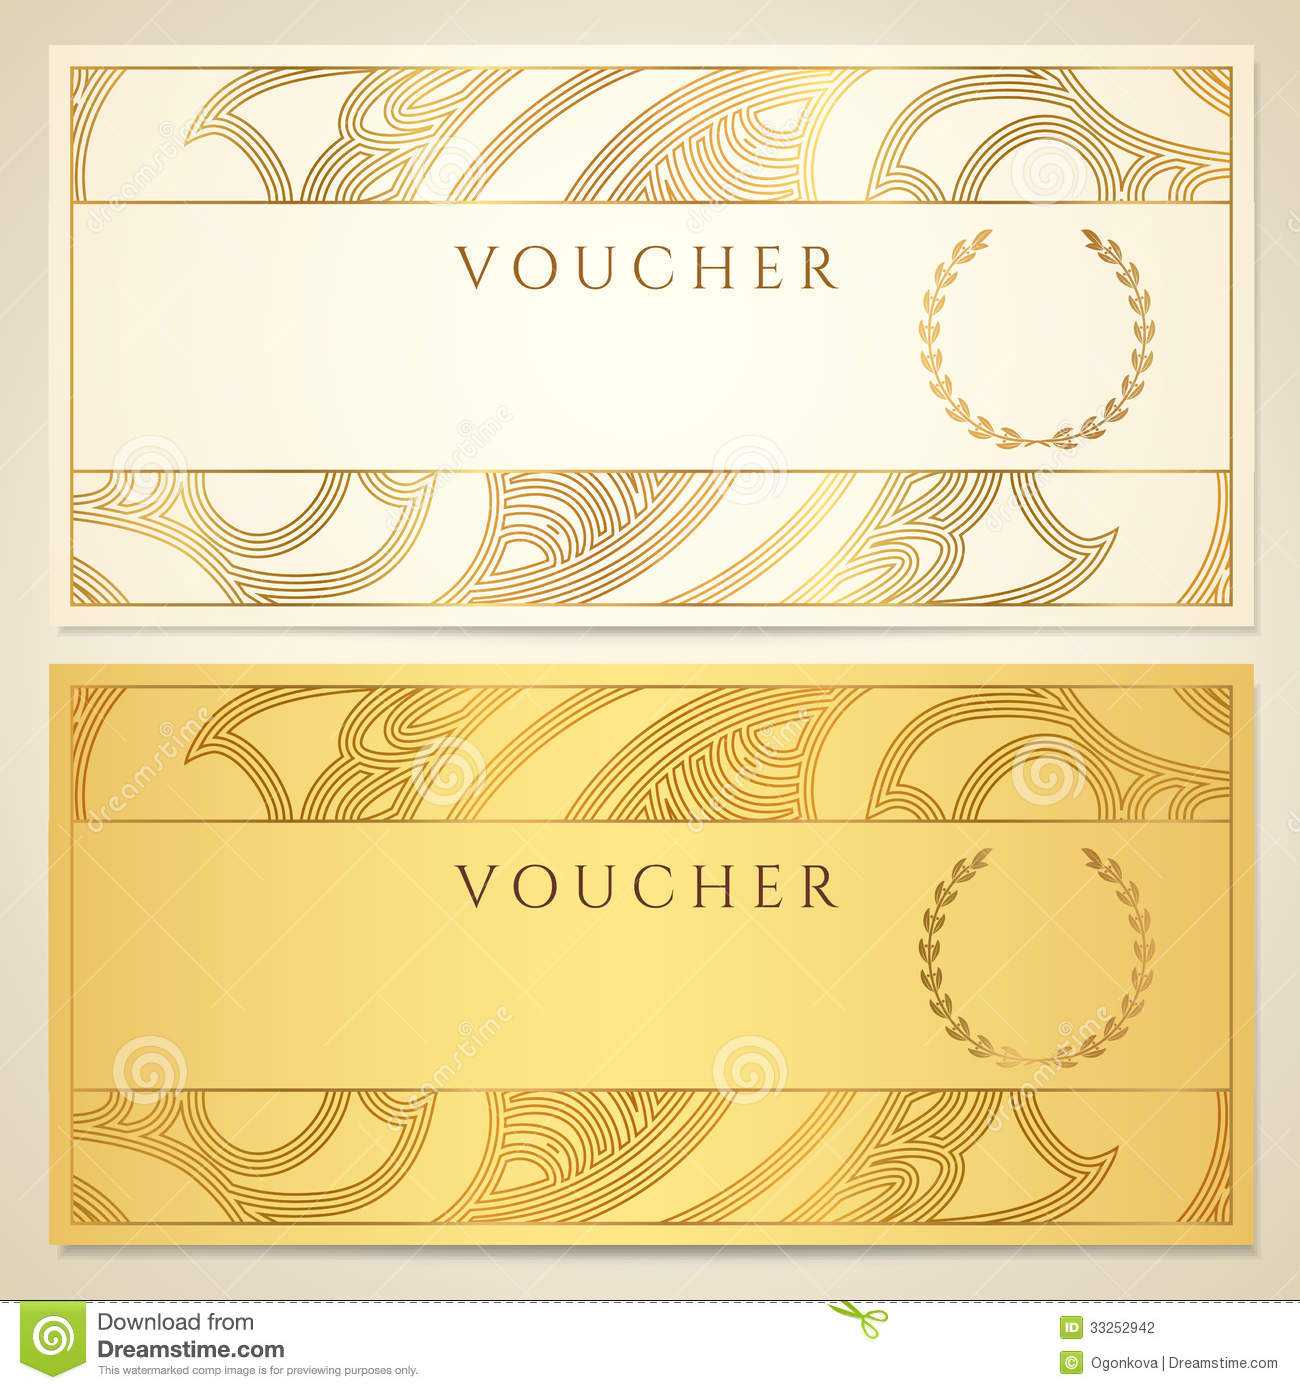 Clipart Gift Certificate Template Throughout Dinner Certificate Template Free